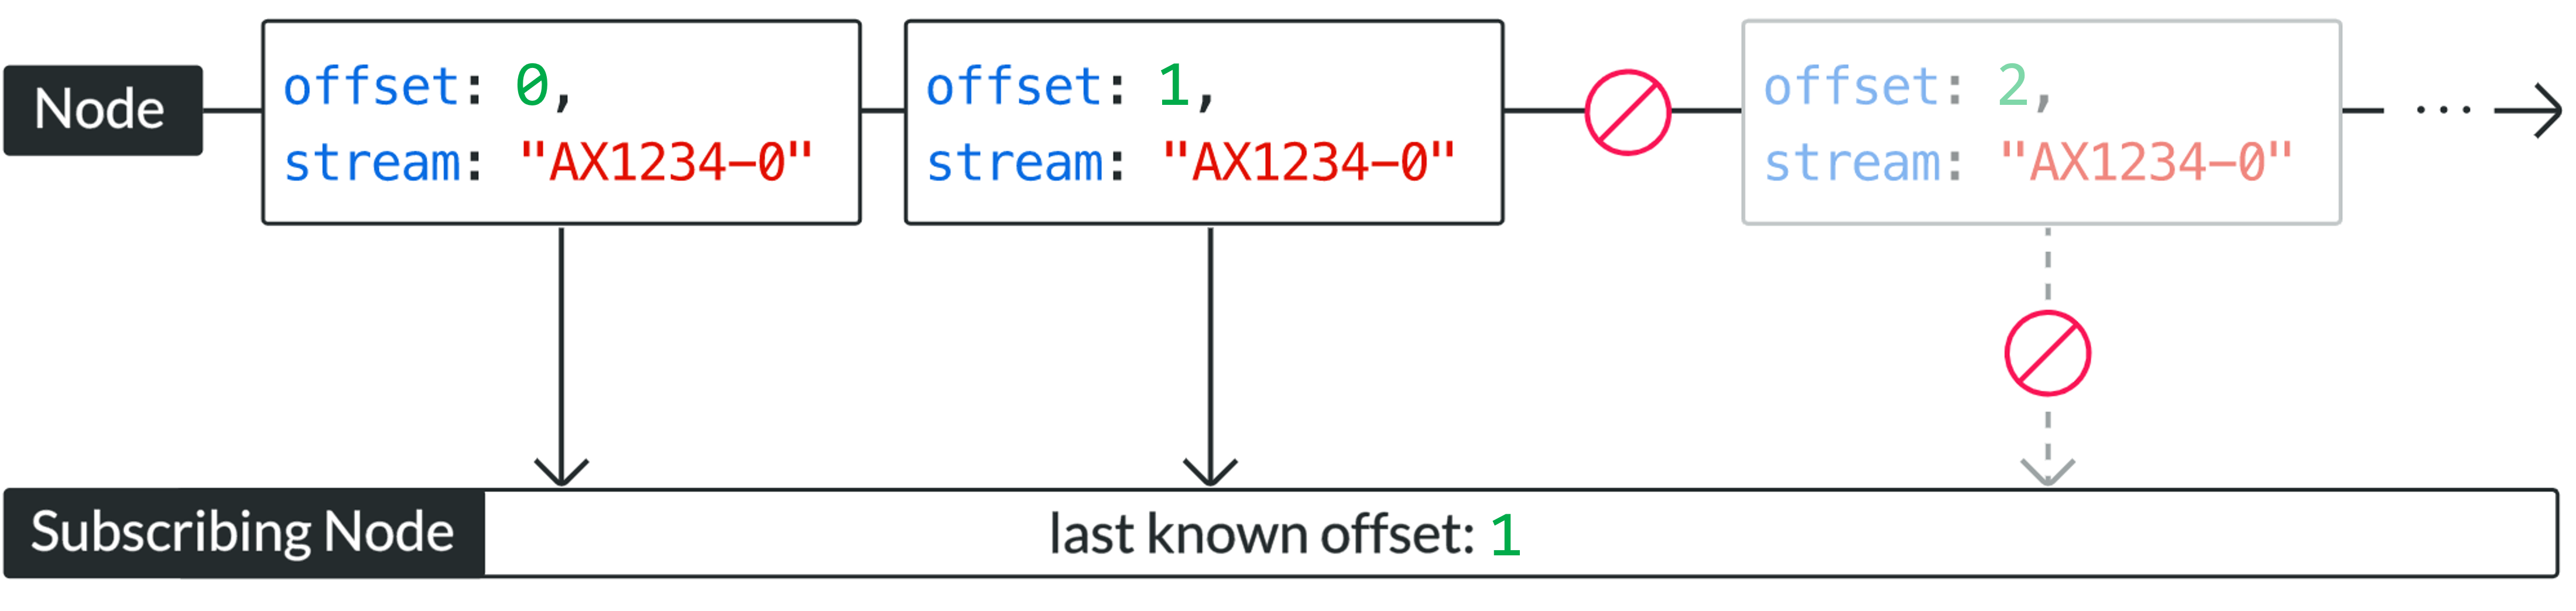 offsets